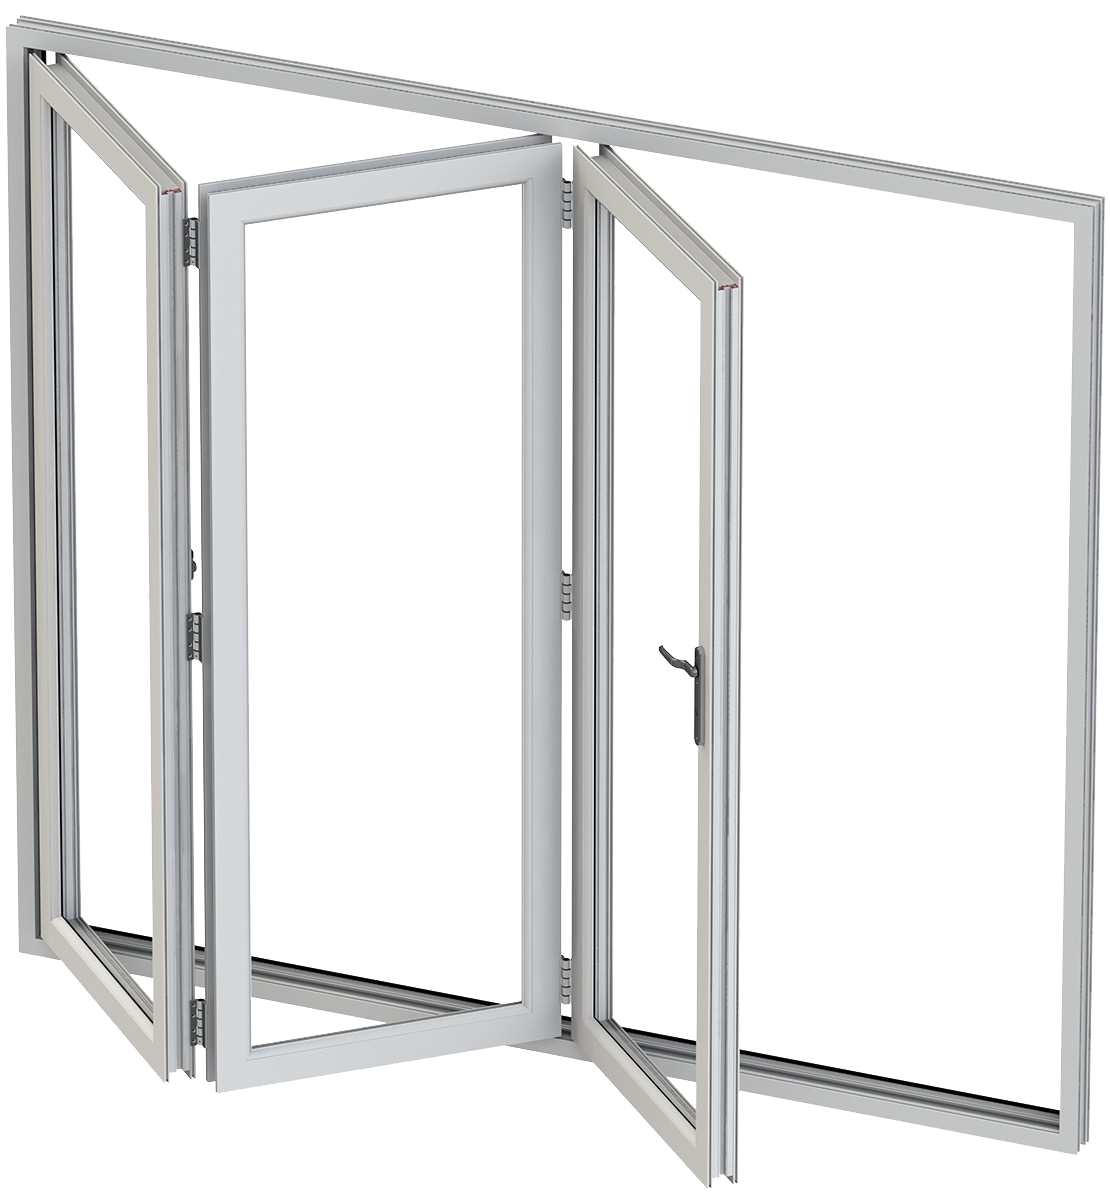 double glazing products oxford